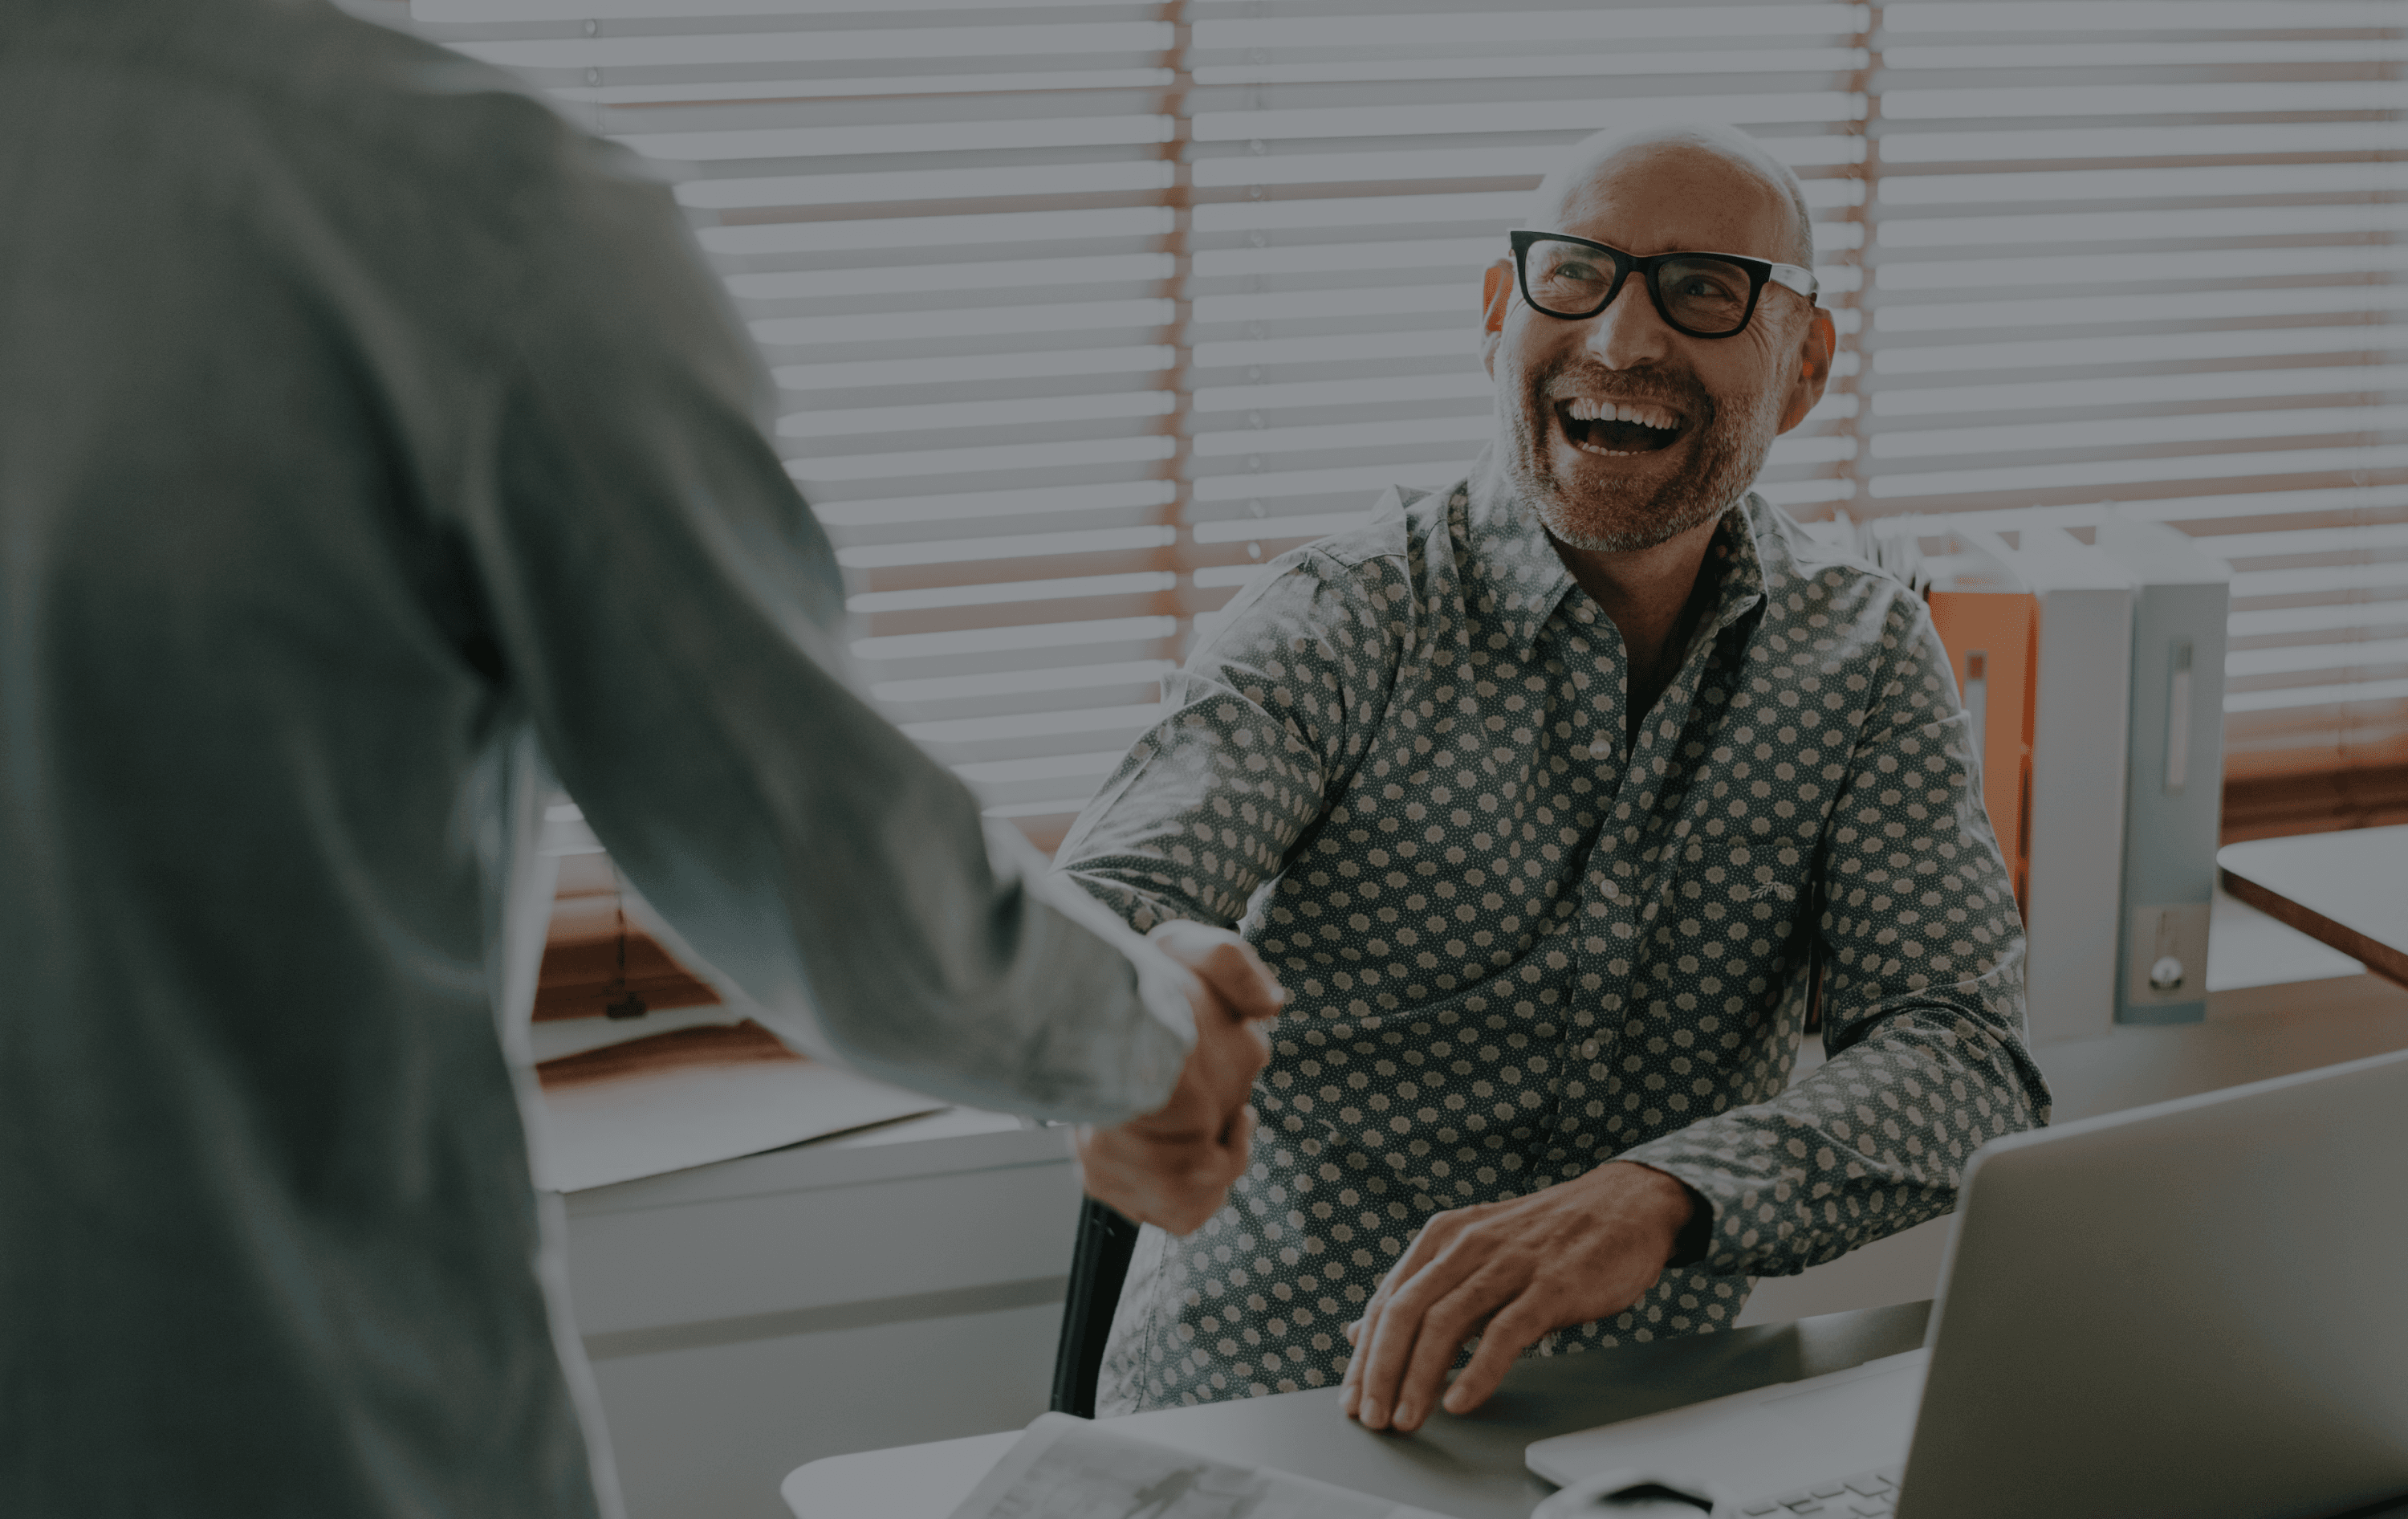 Person smiling while closing a deal by handshaking another person